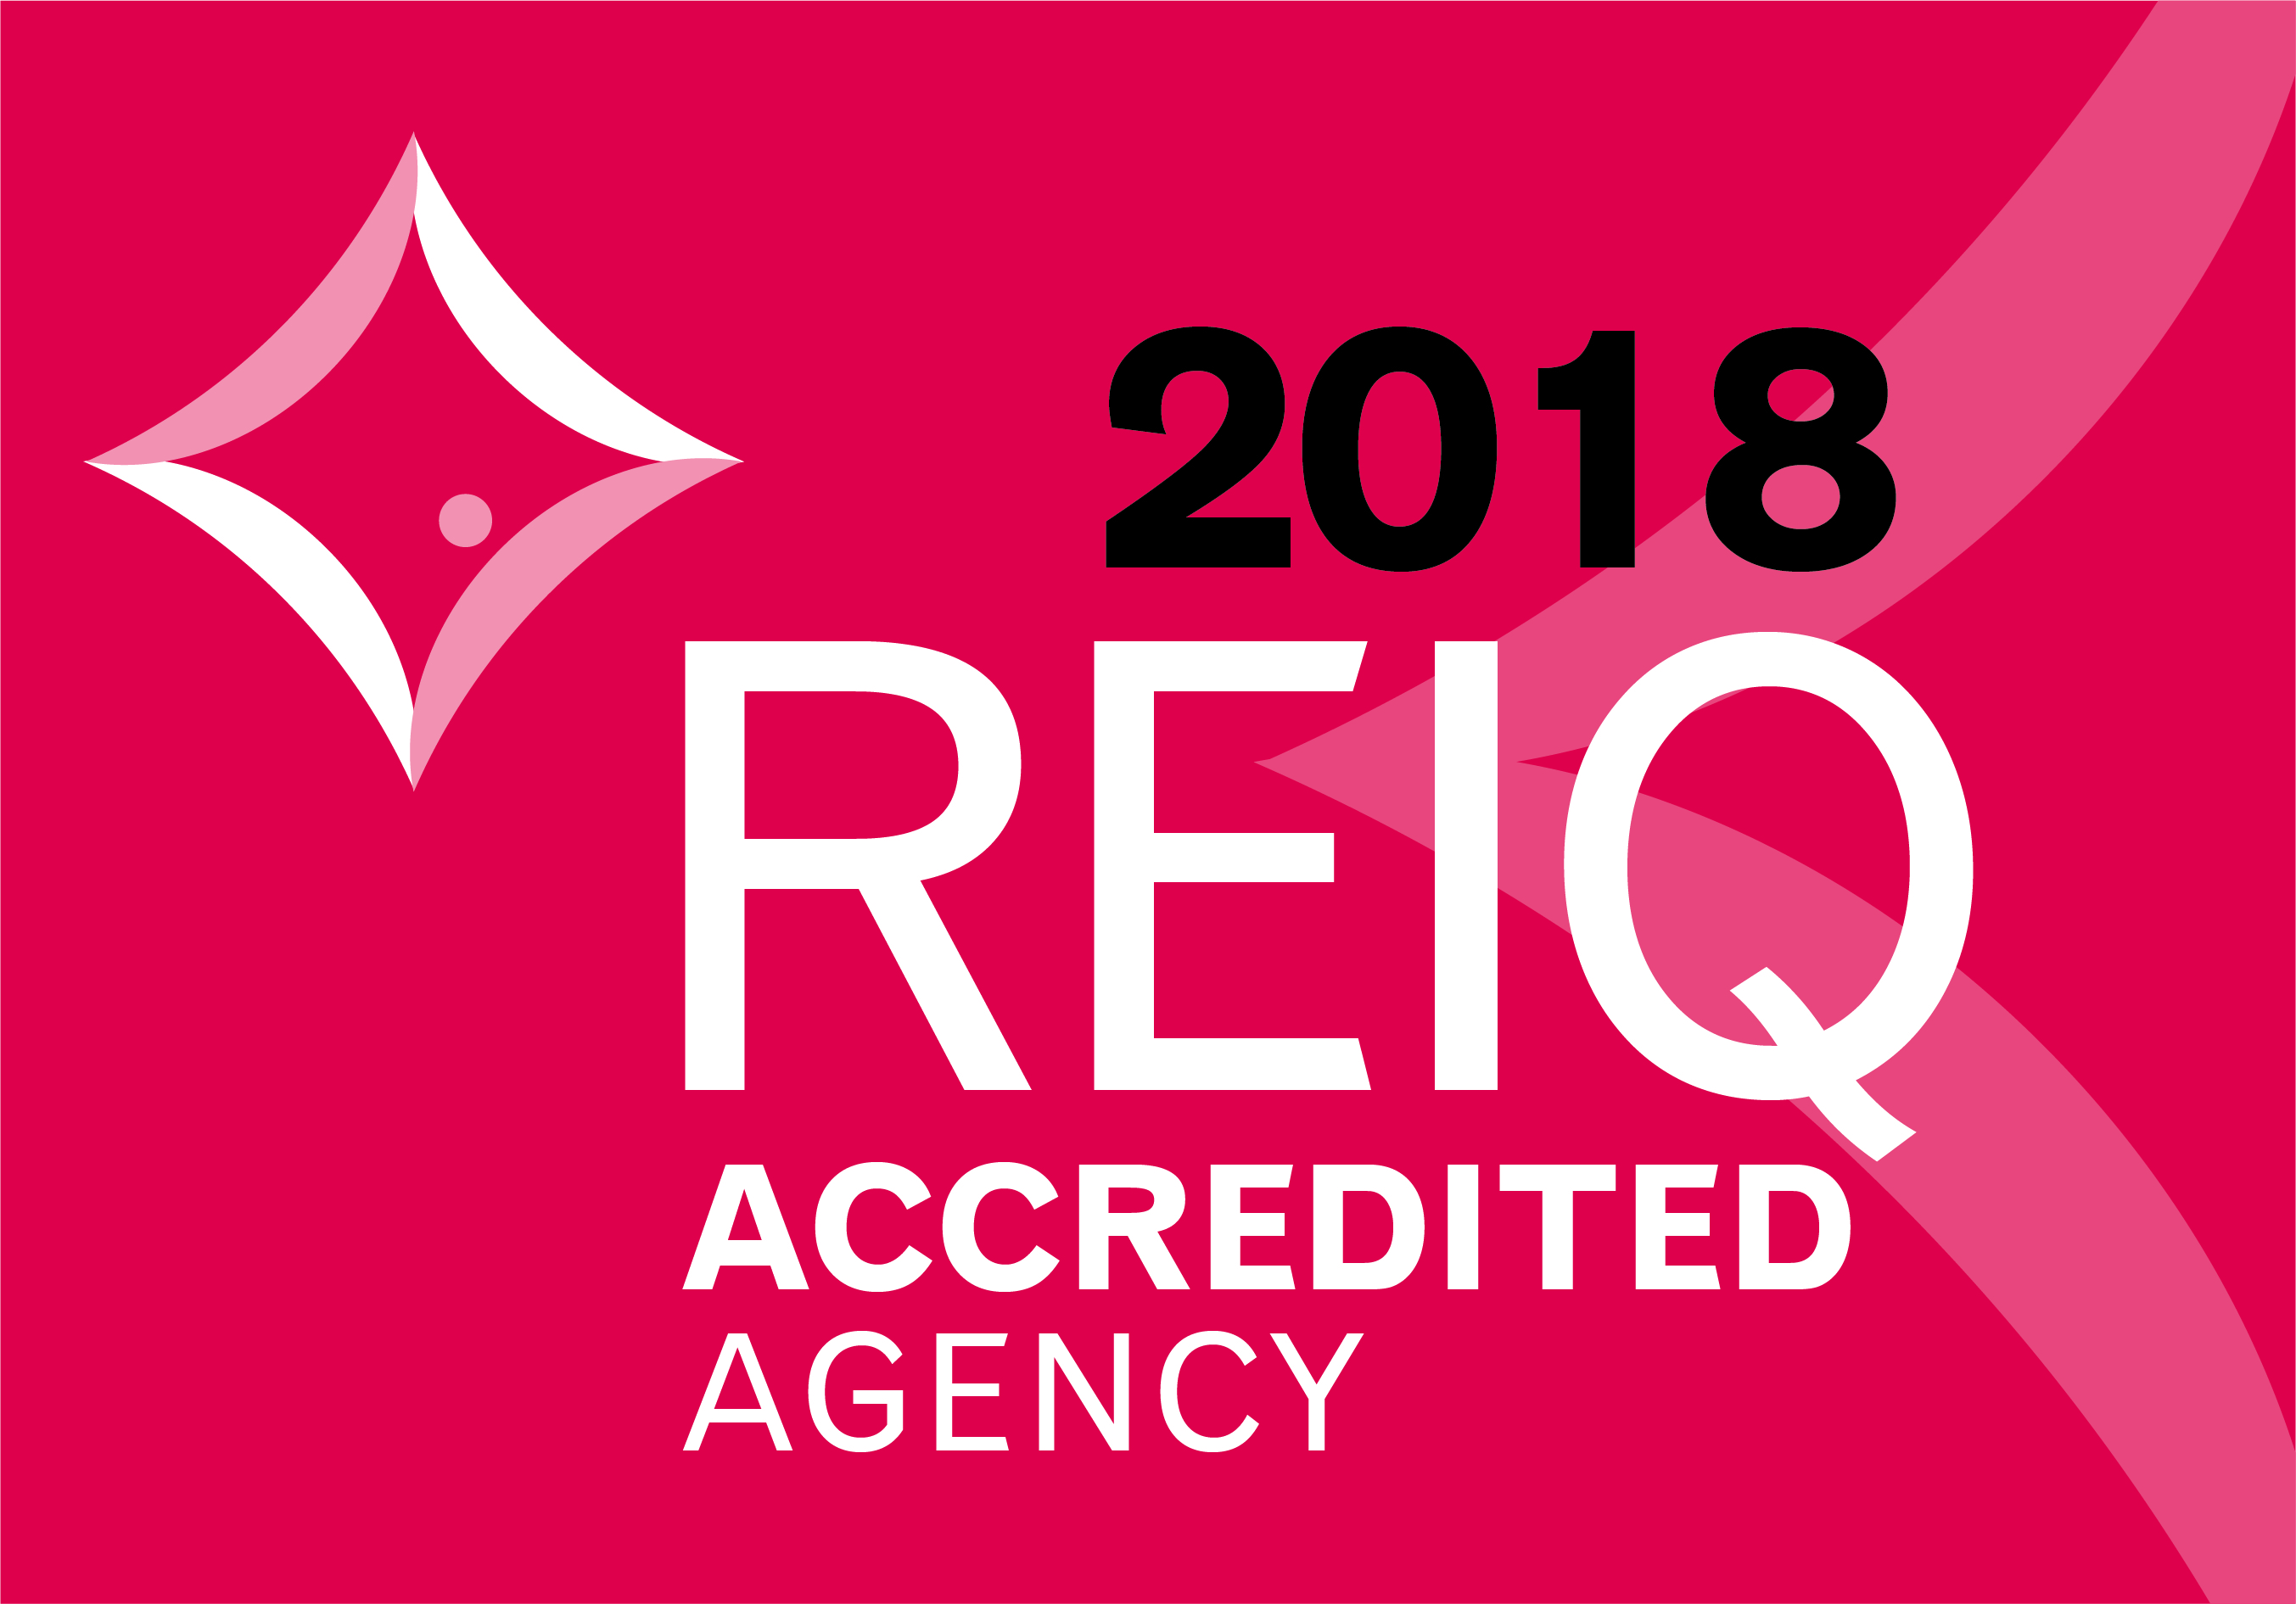 Property code. Accredited Agency. Swiss Accreditation Agency. R&Q accredited.